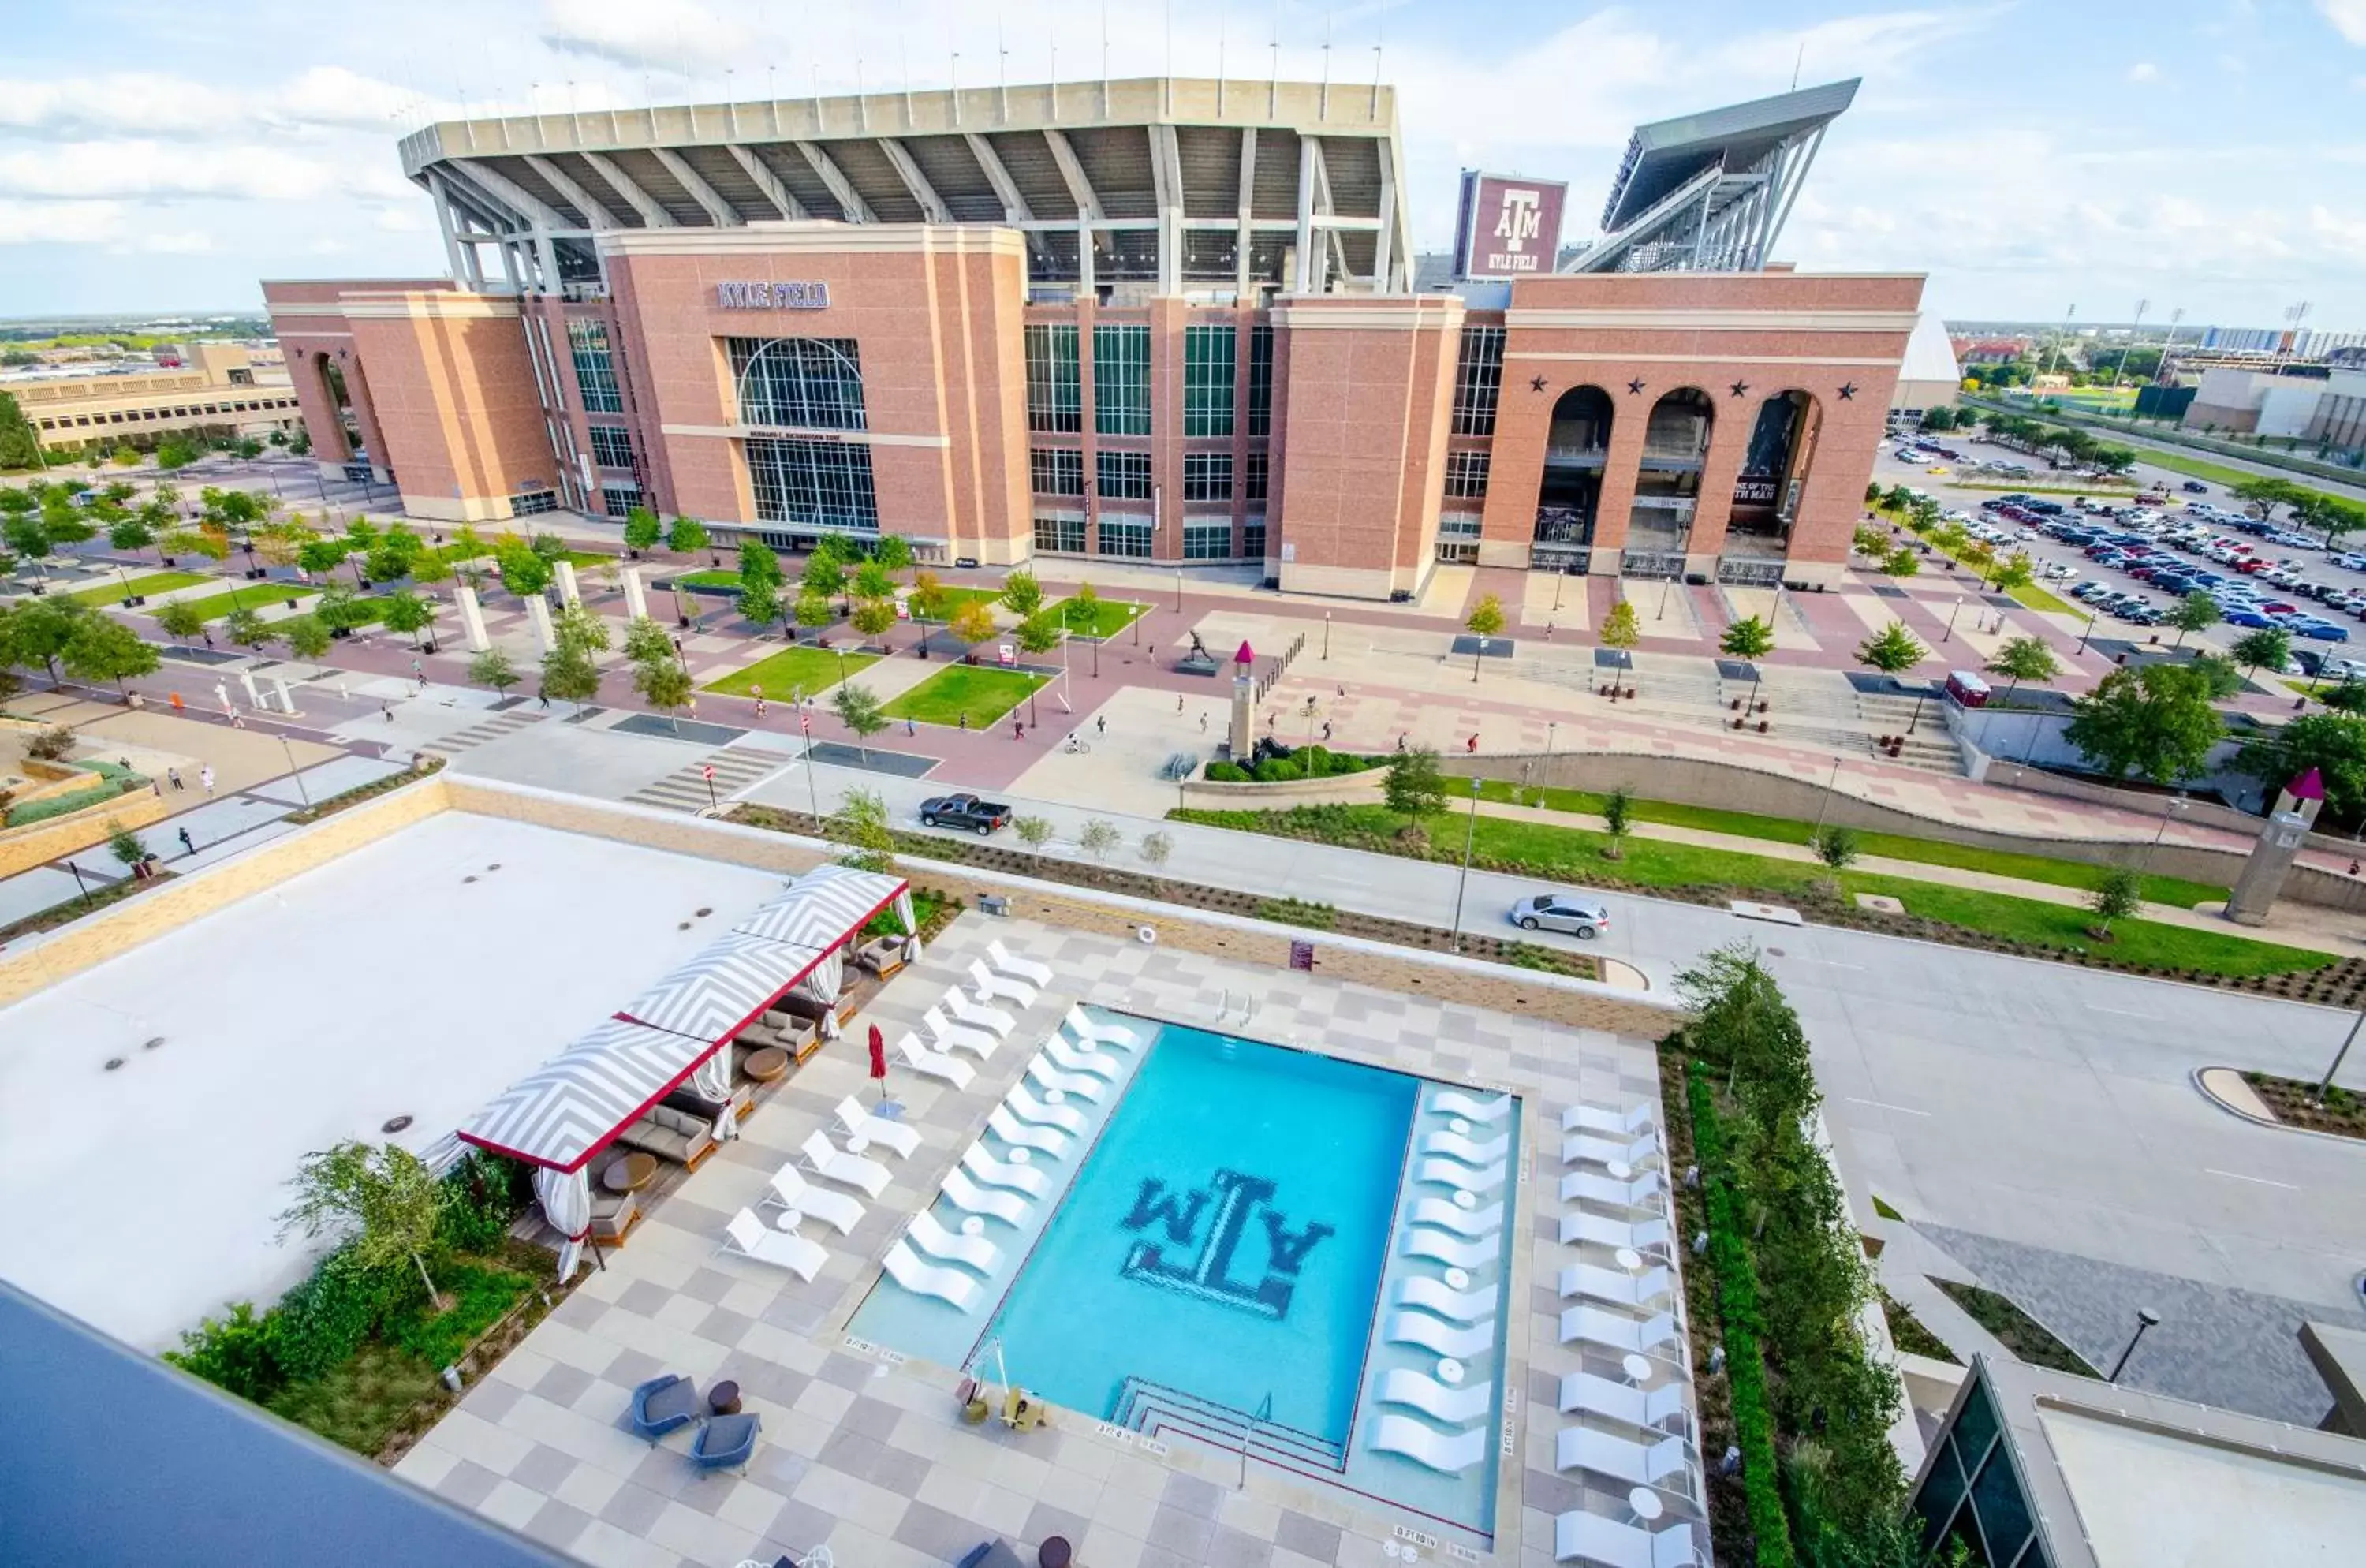 Bird's eye view, Pool View in Texas A&M Hotel and Conference Center